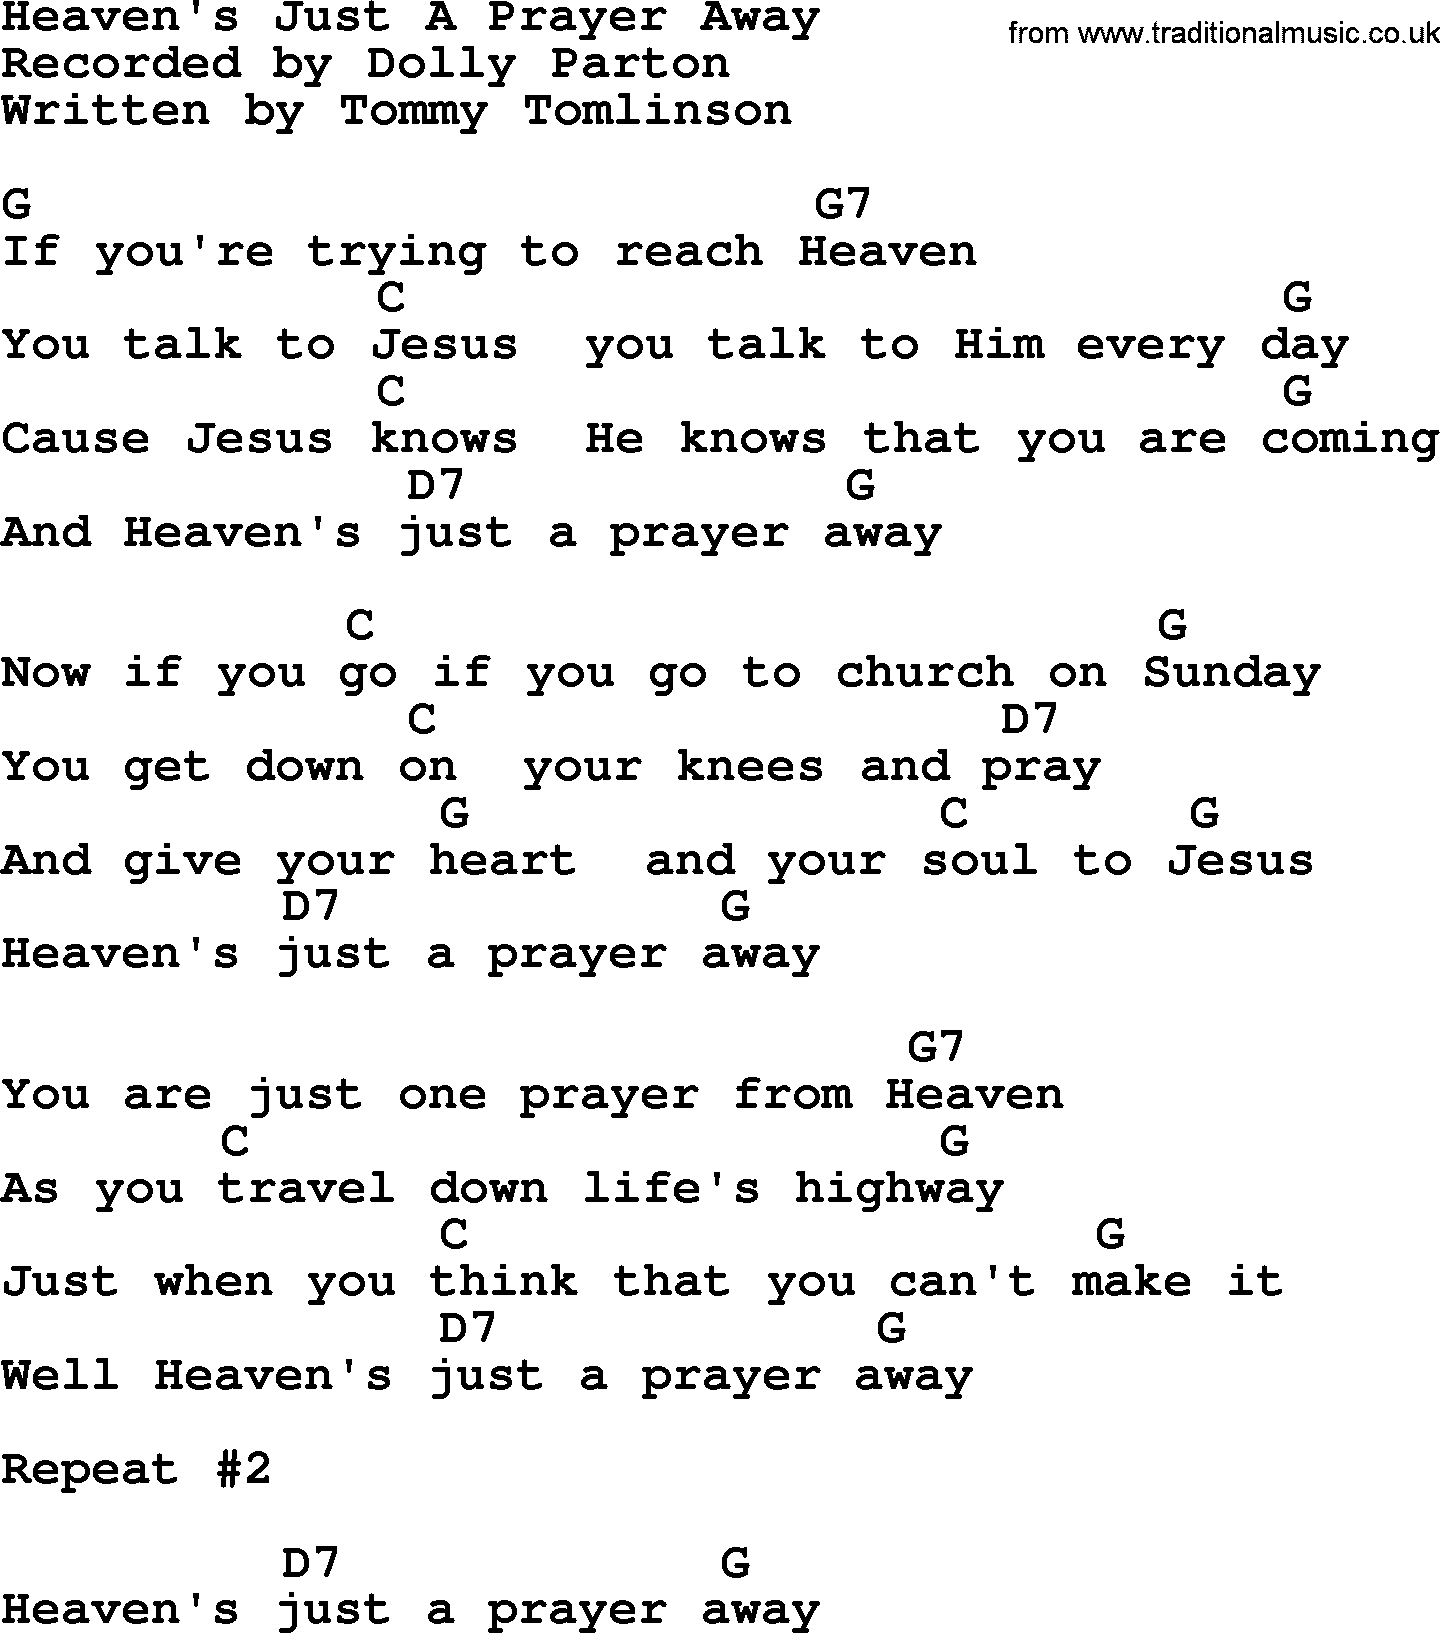 Dolly Parton song: Heaven's Just A Prayer Away, lyrics and chords